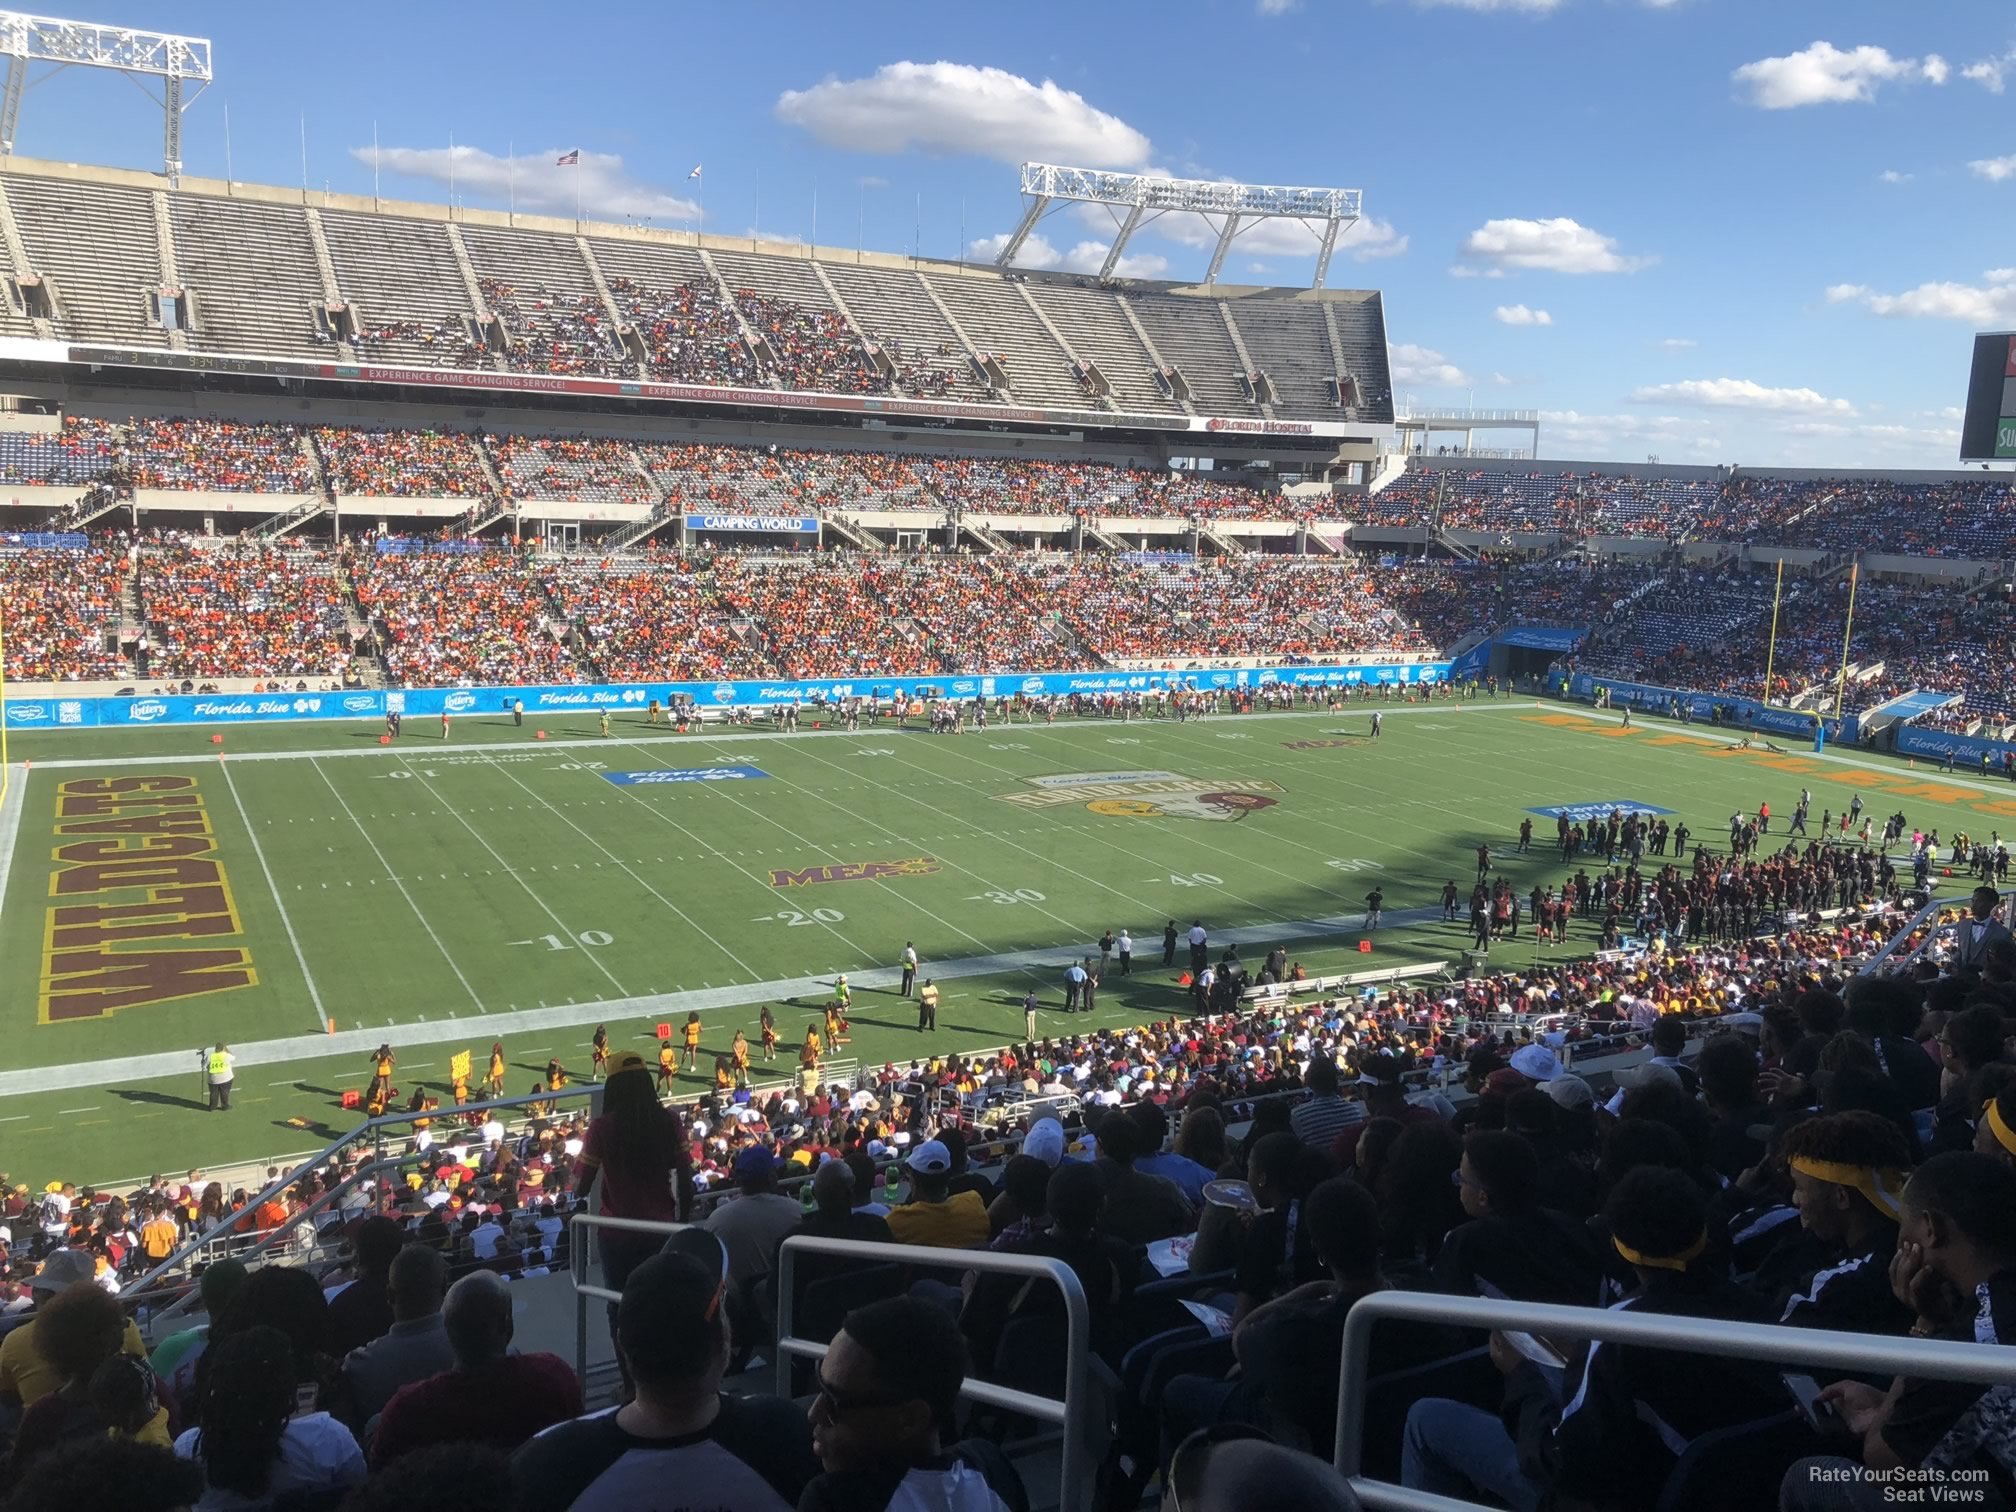 section p40, row m seat view  for football - camping world stadium